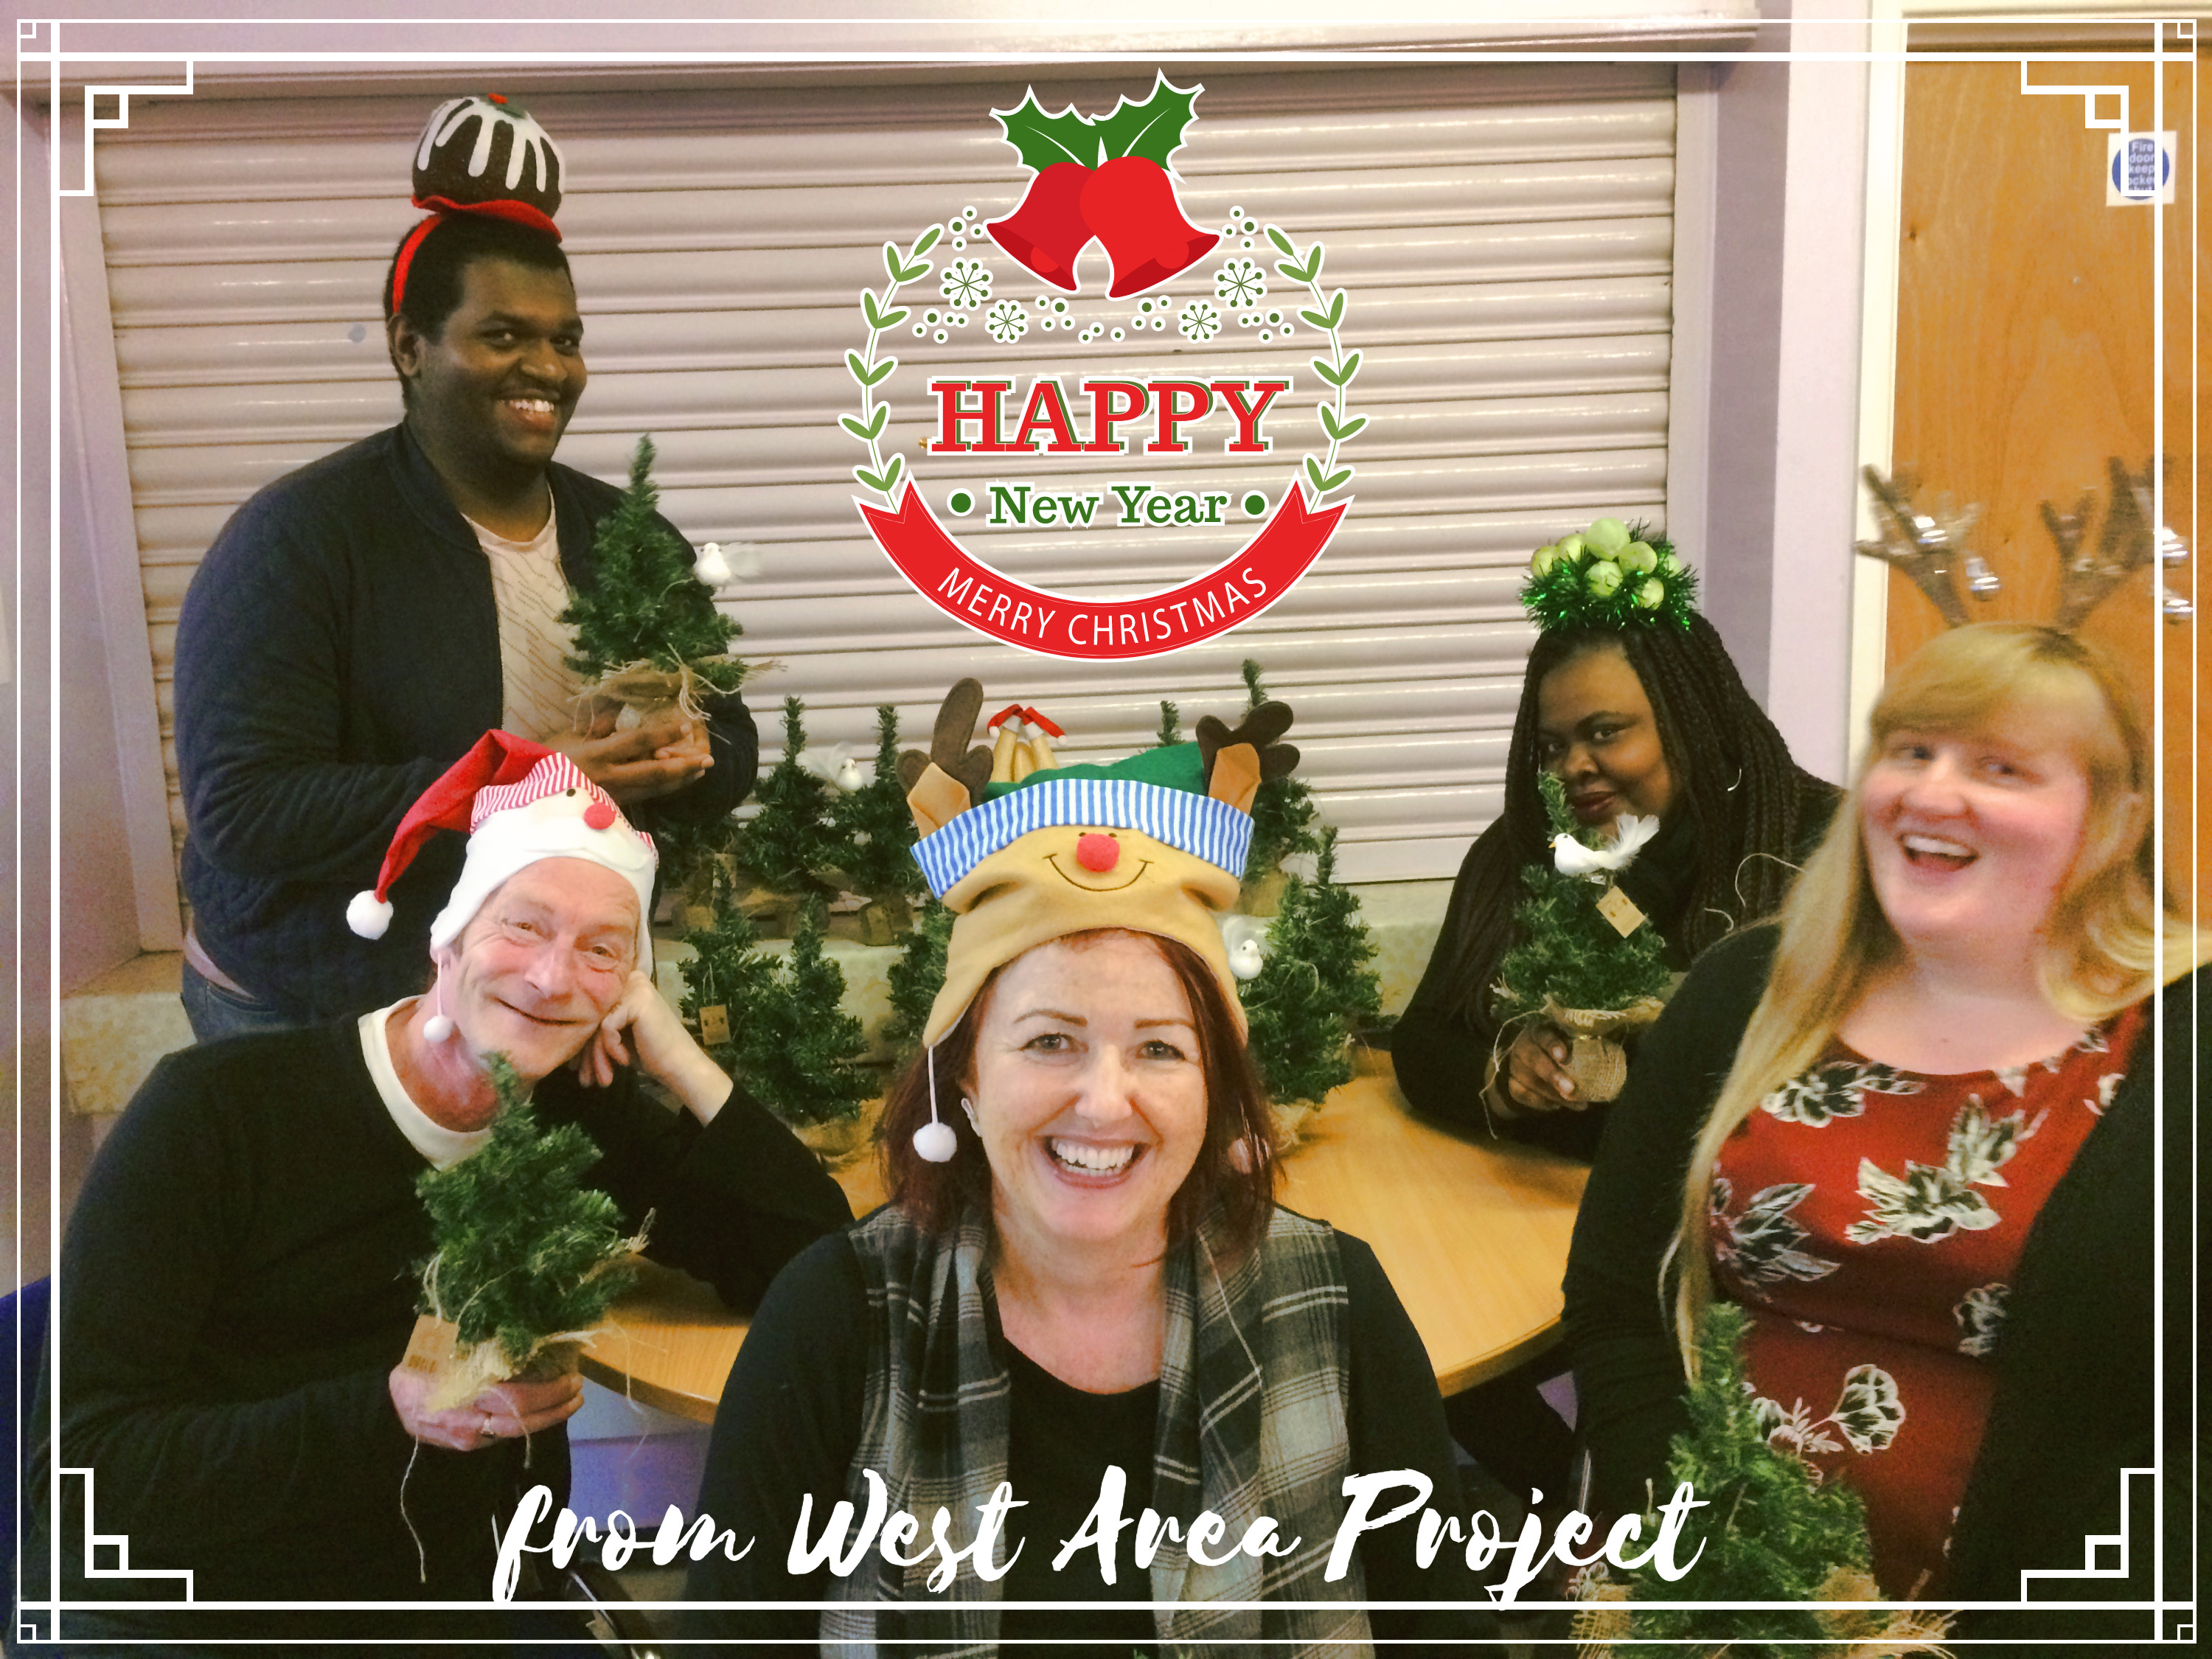 west area project christmas